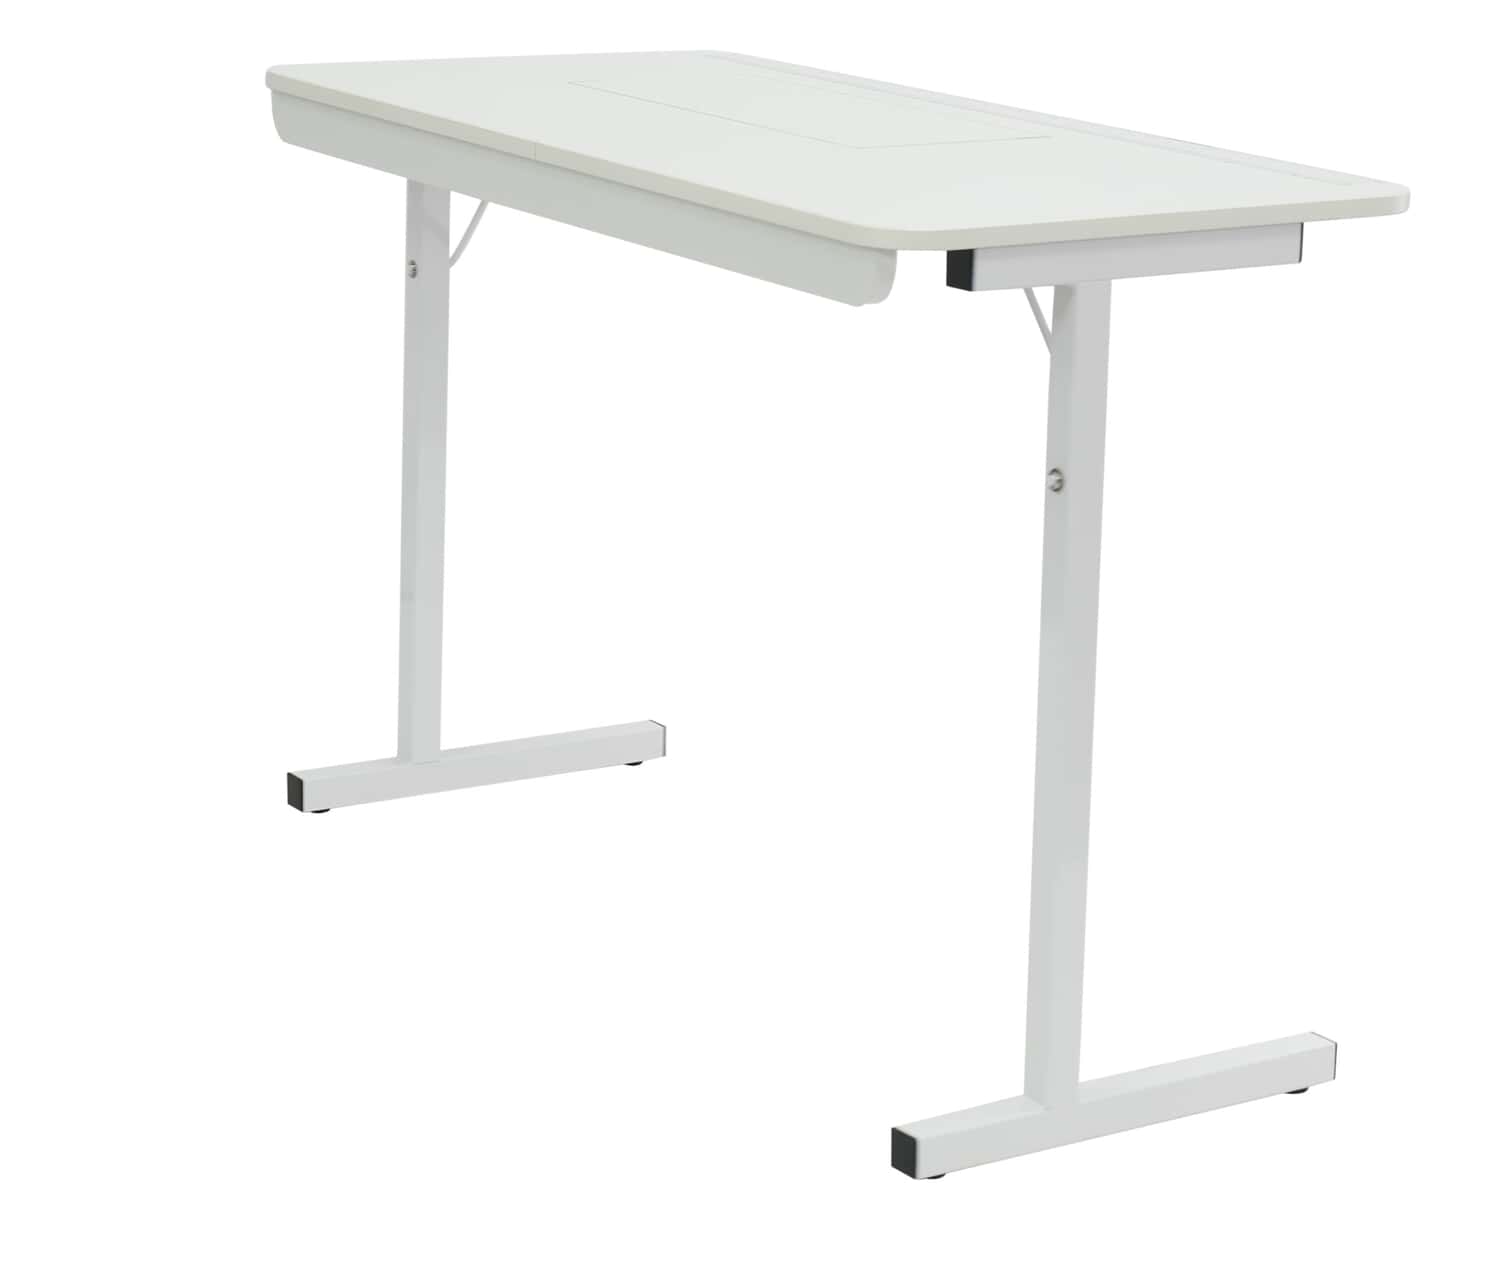  Sewing Tables And Cabinets Clearance